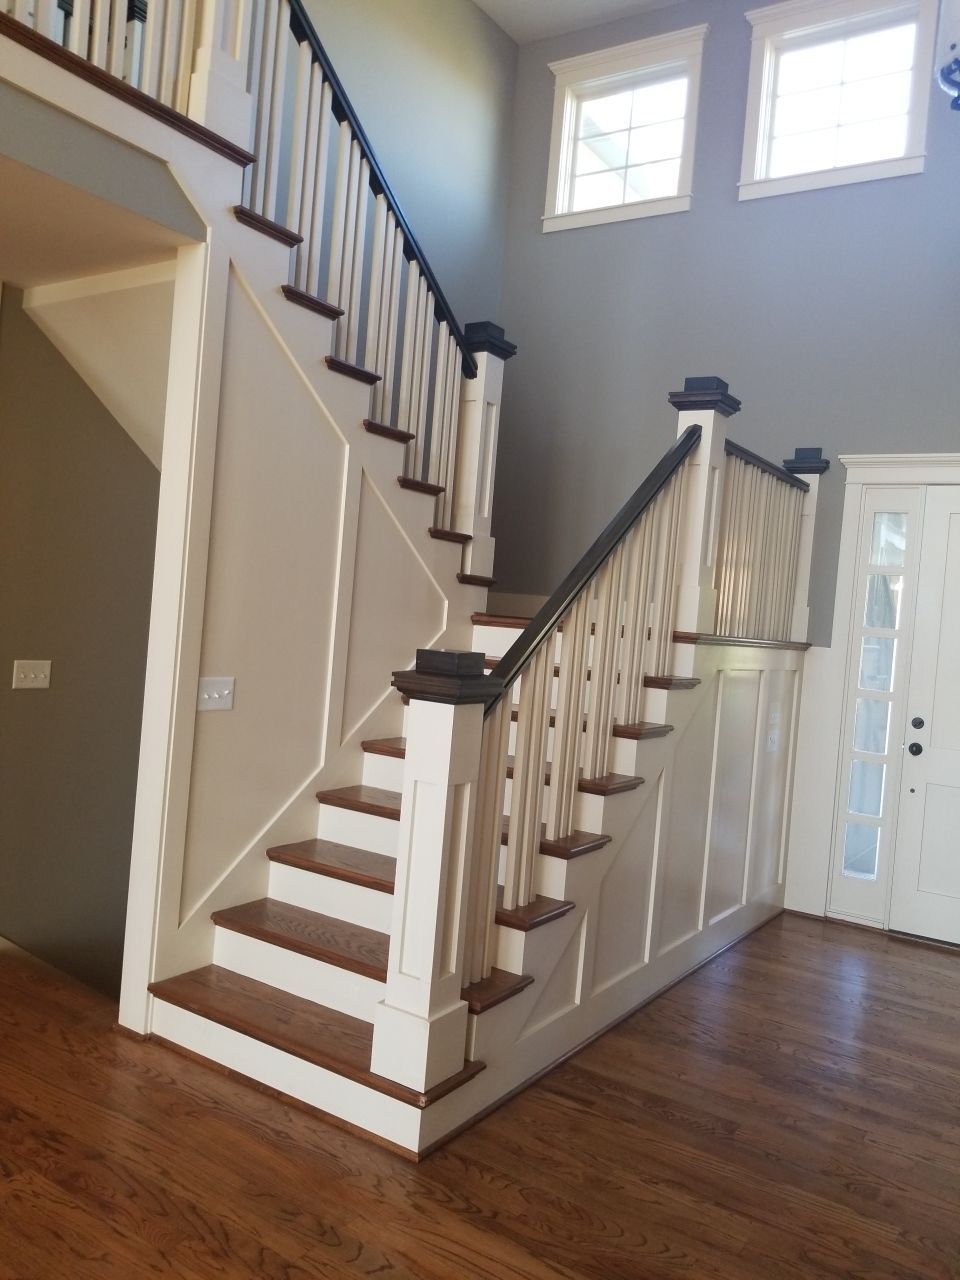 A white and wooden design staircase of a house- house painters in Leawood, KS